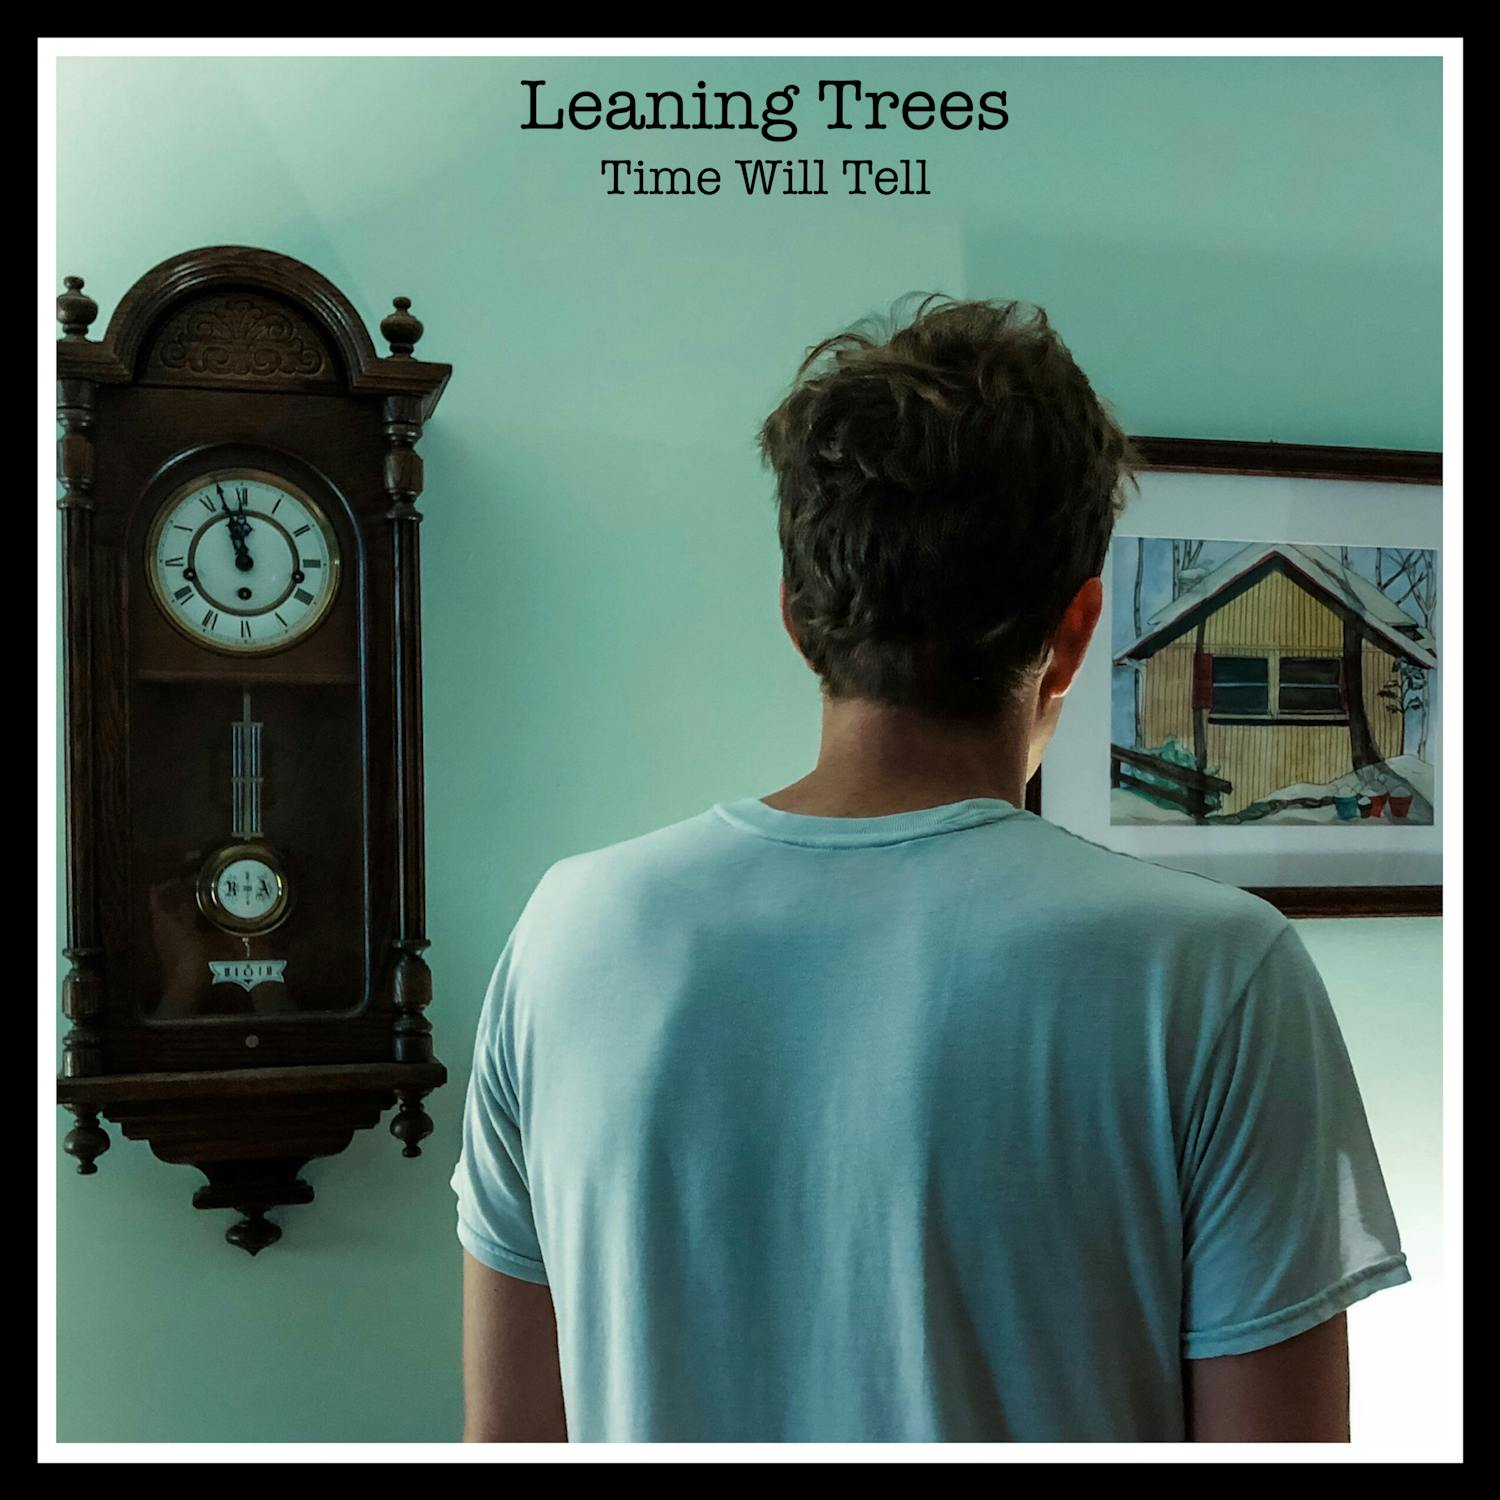 Leaning Trees' latest LP "Time Will Tell" is more intricate and experimental than its predecessors.